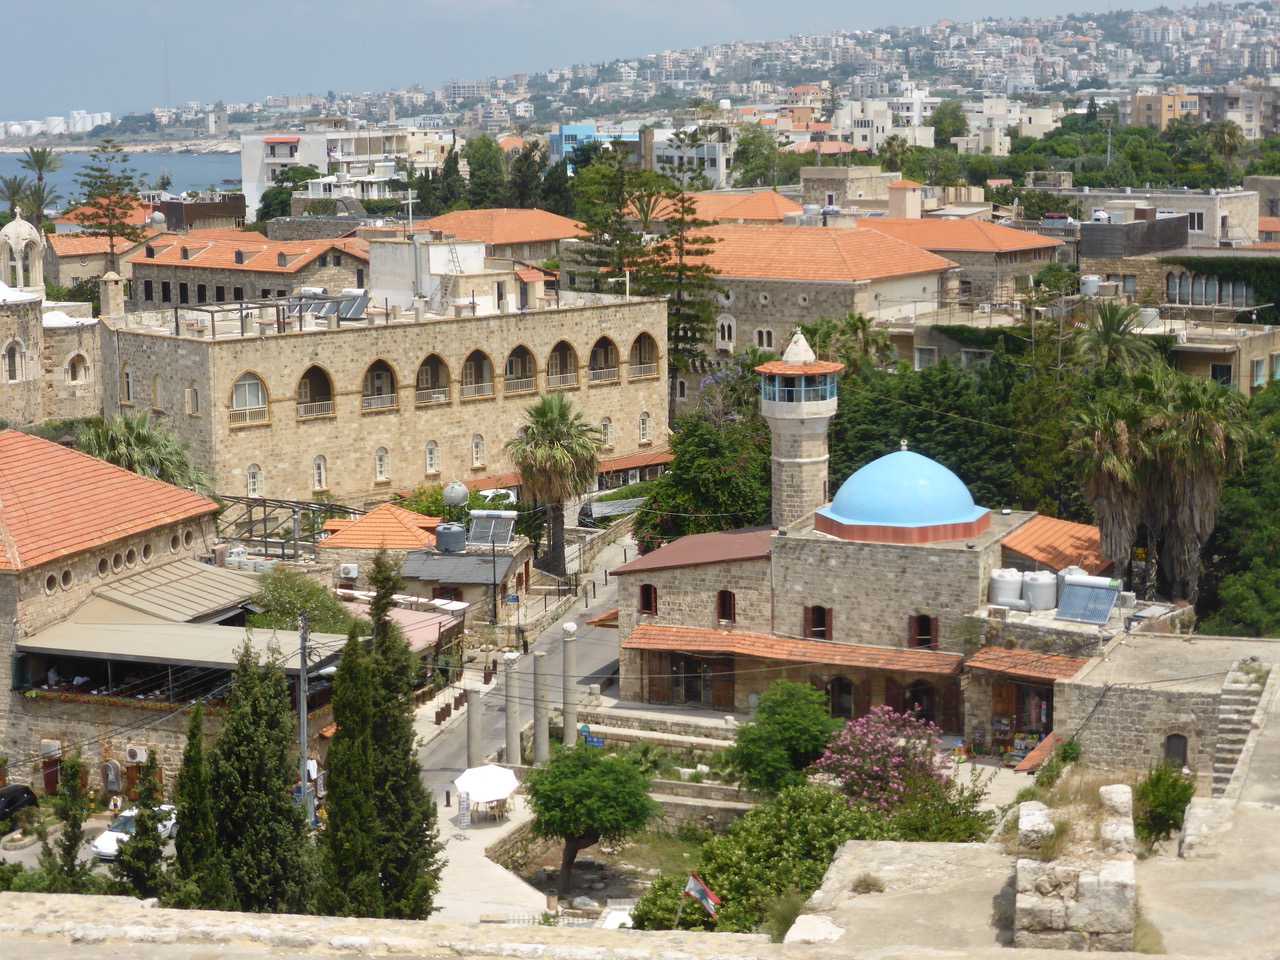 Byblos seen from the castle, Beirut